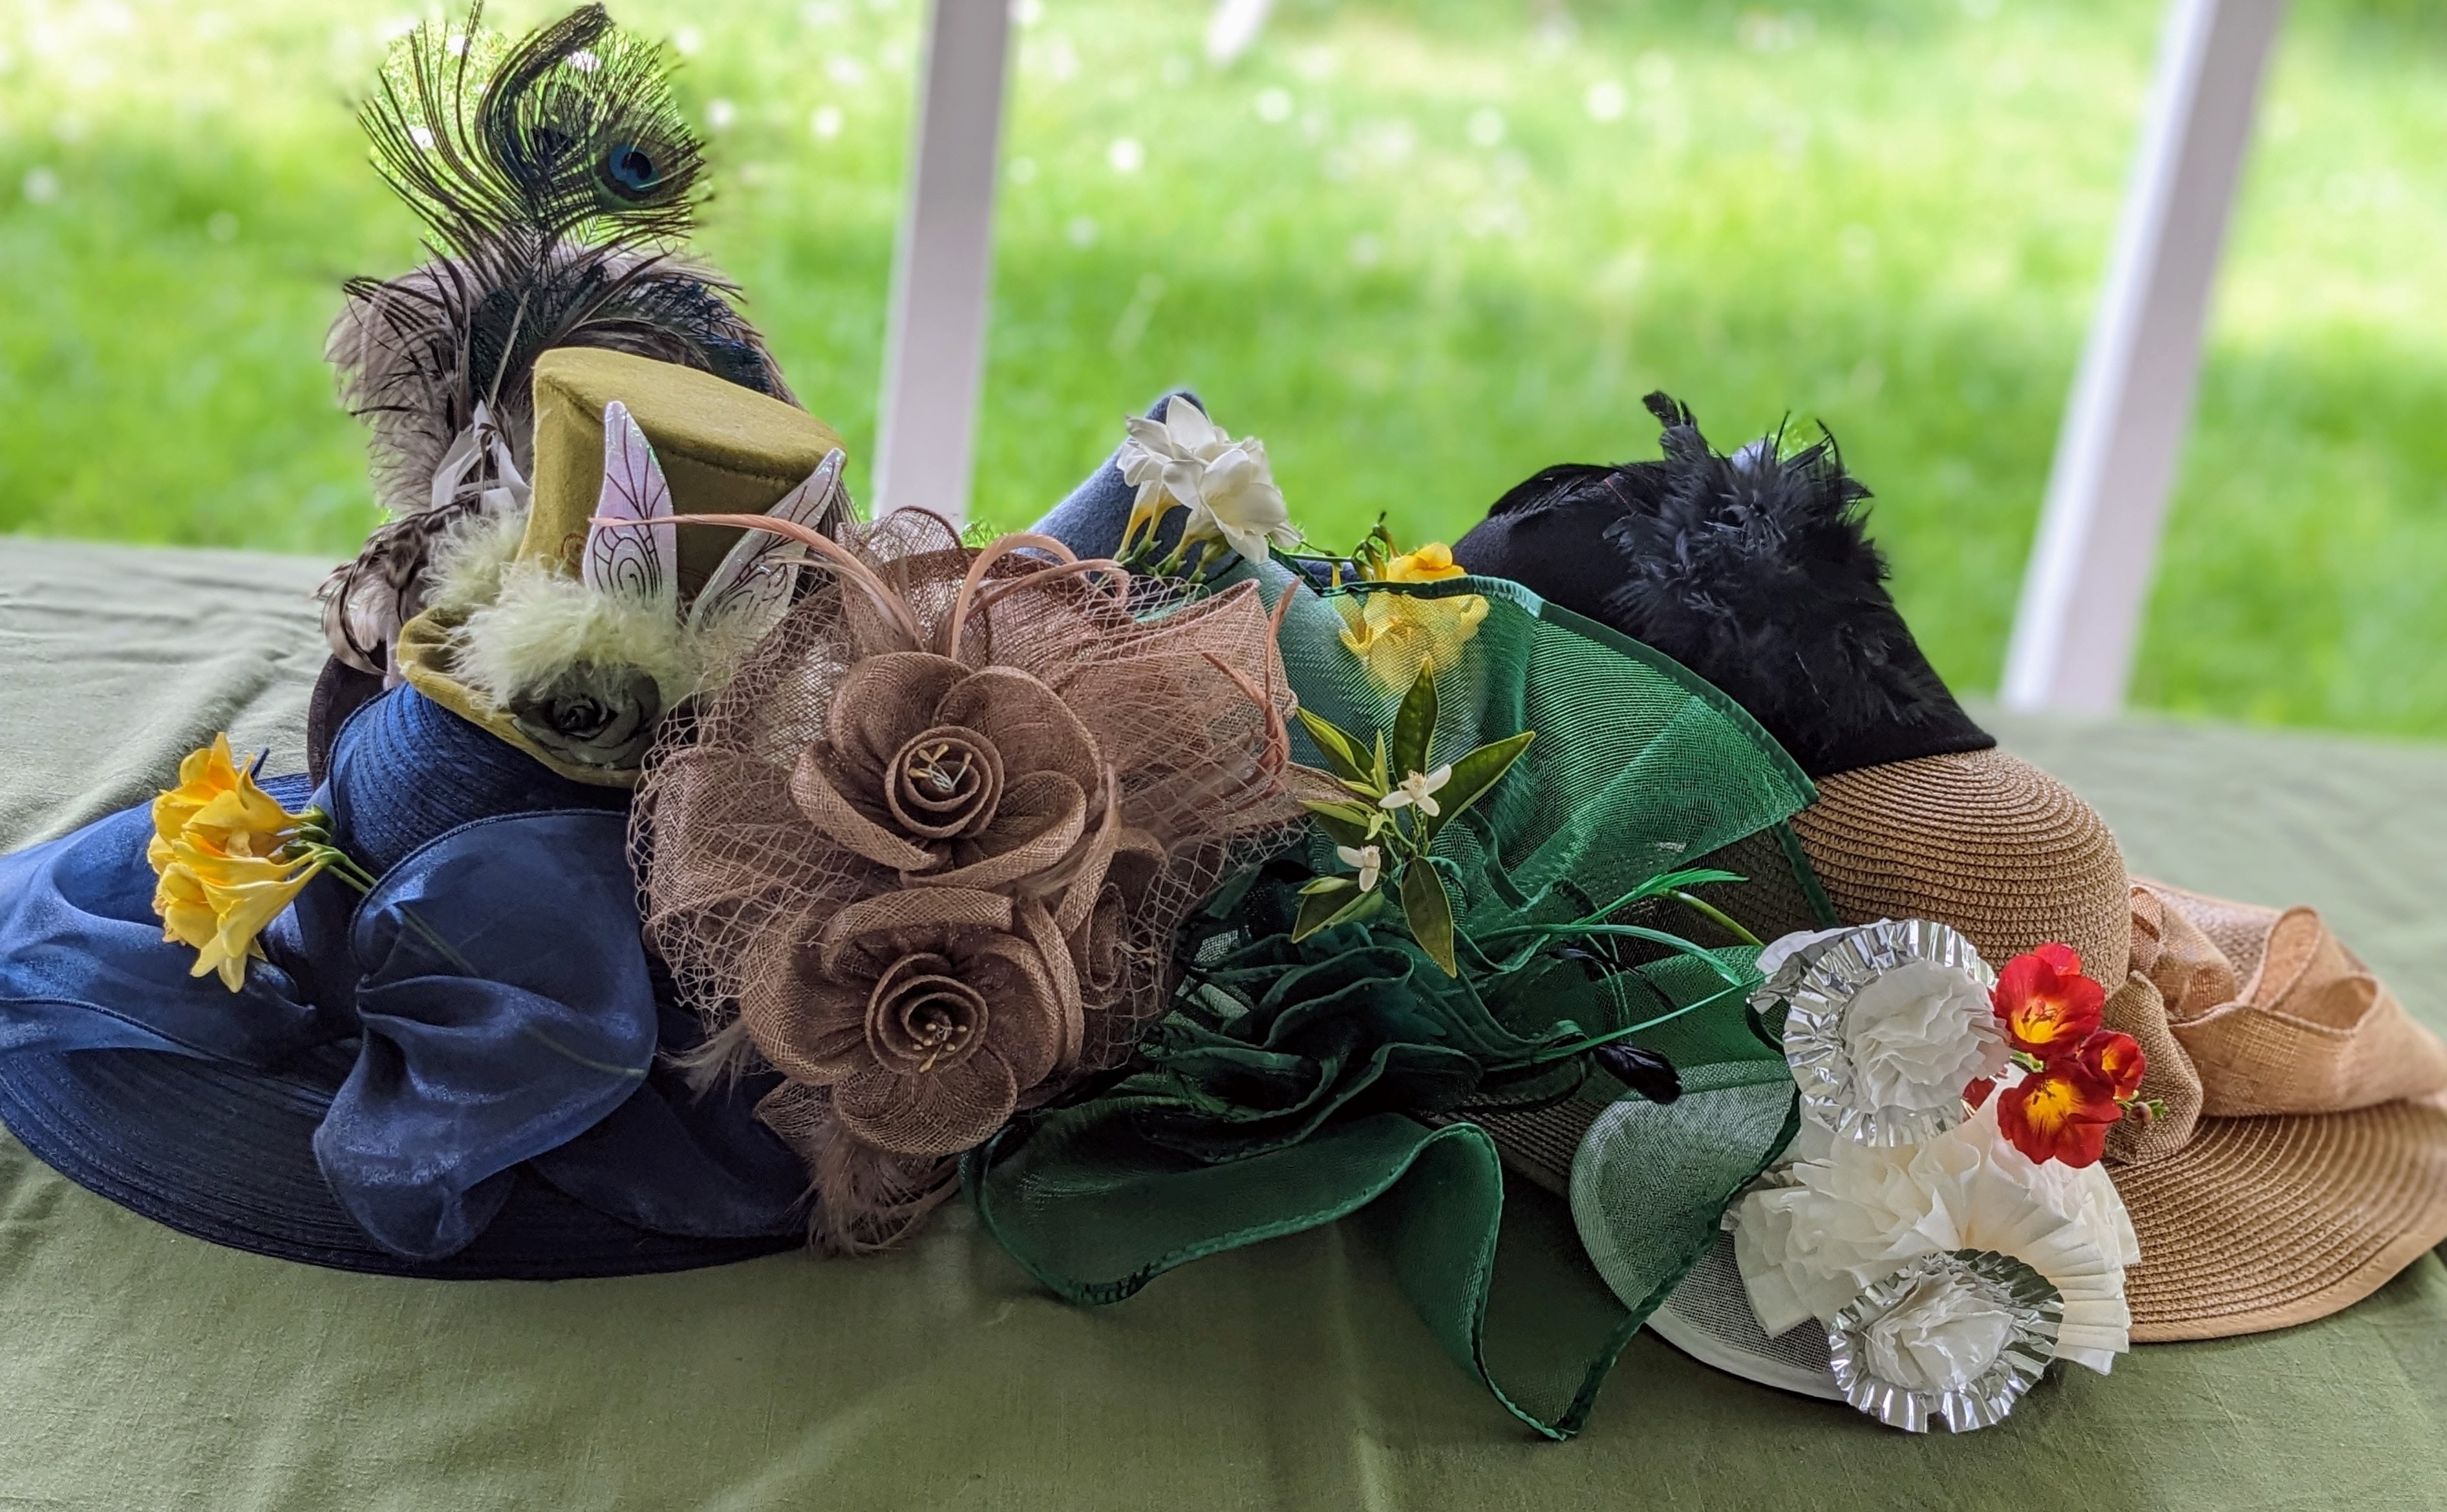 Hats - different styles and colors on a table